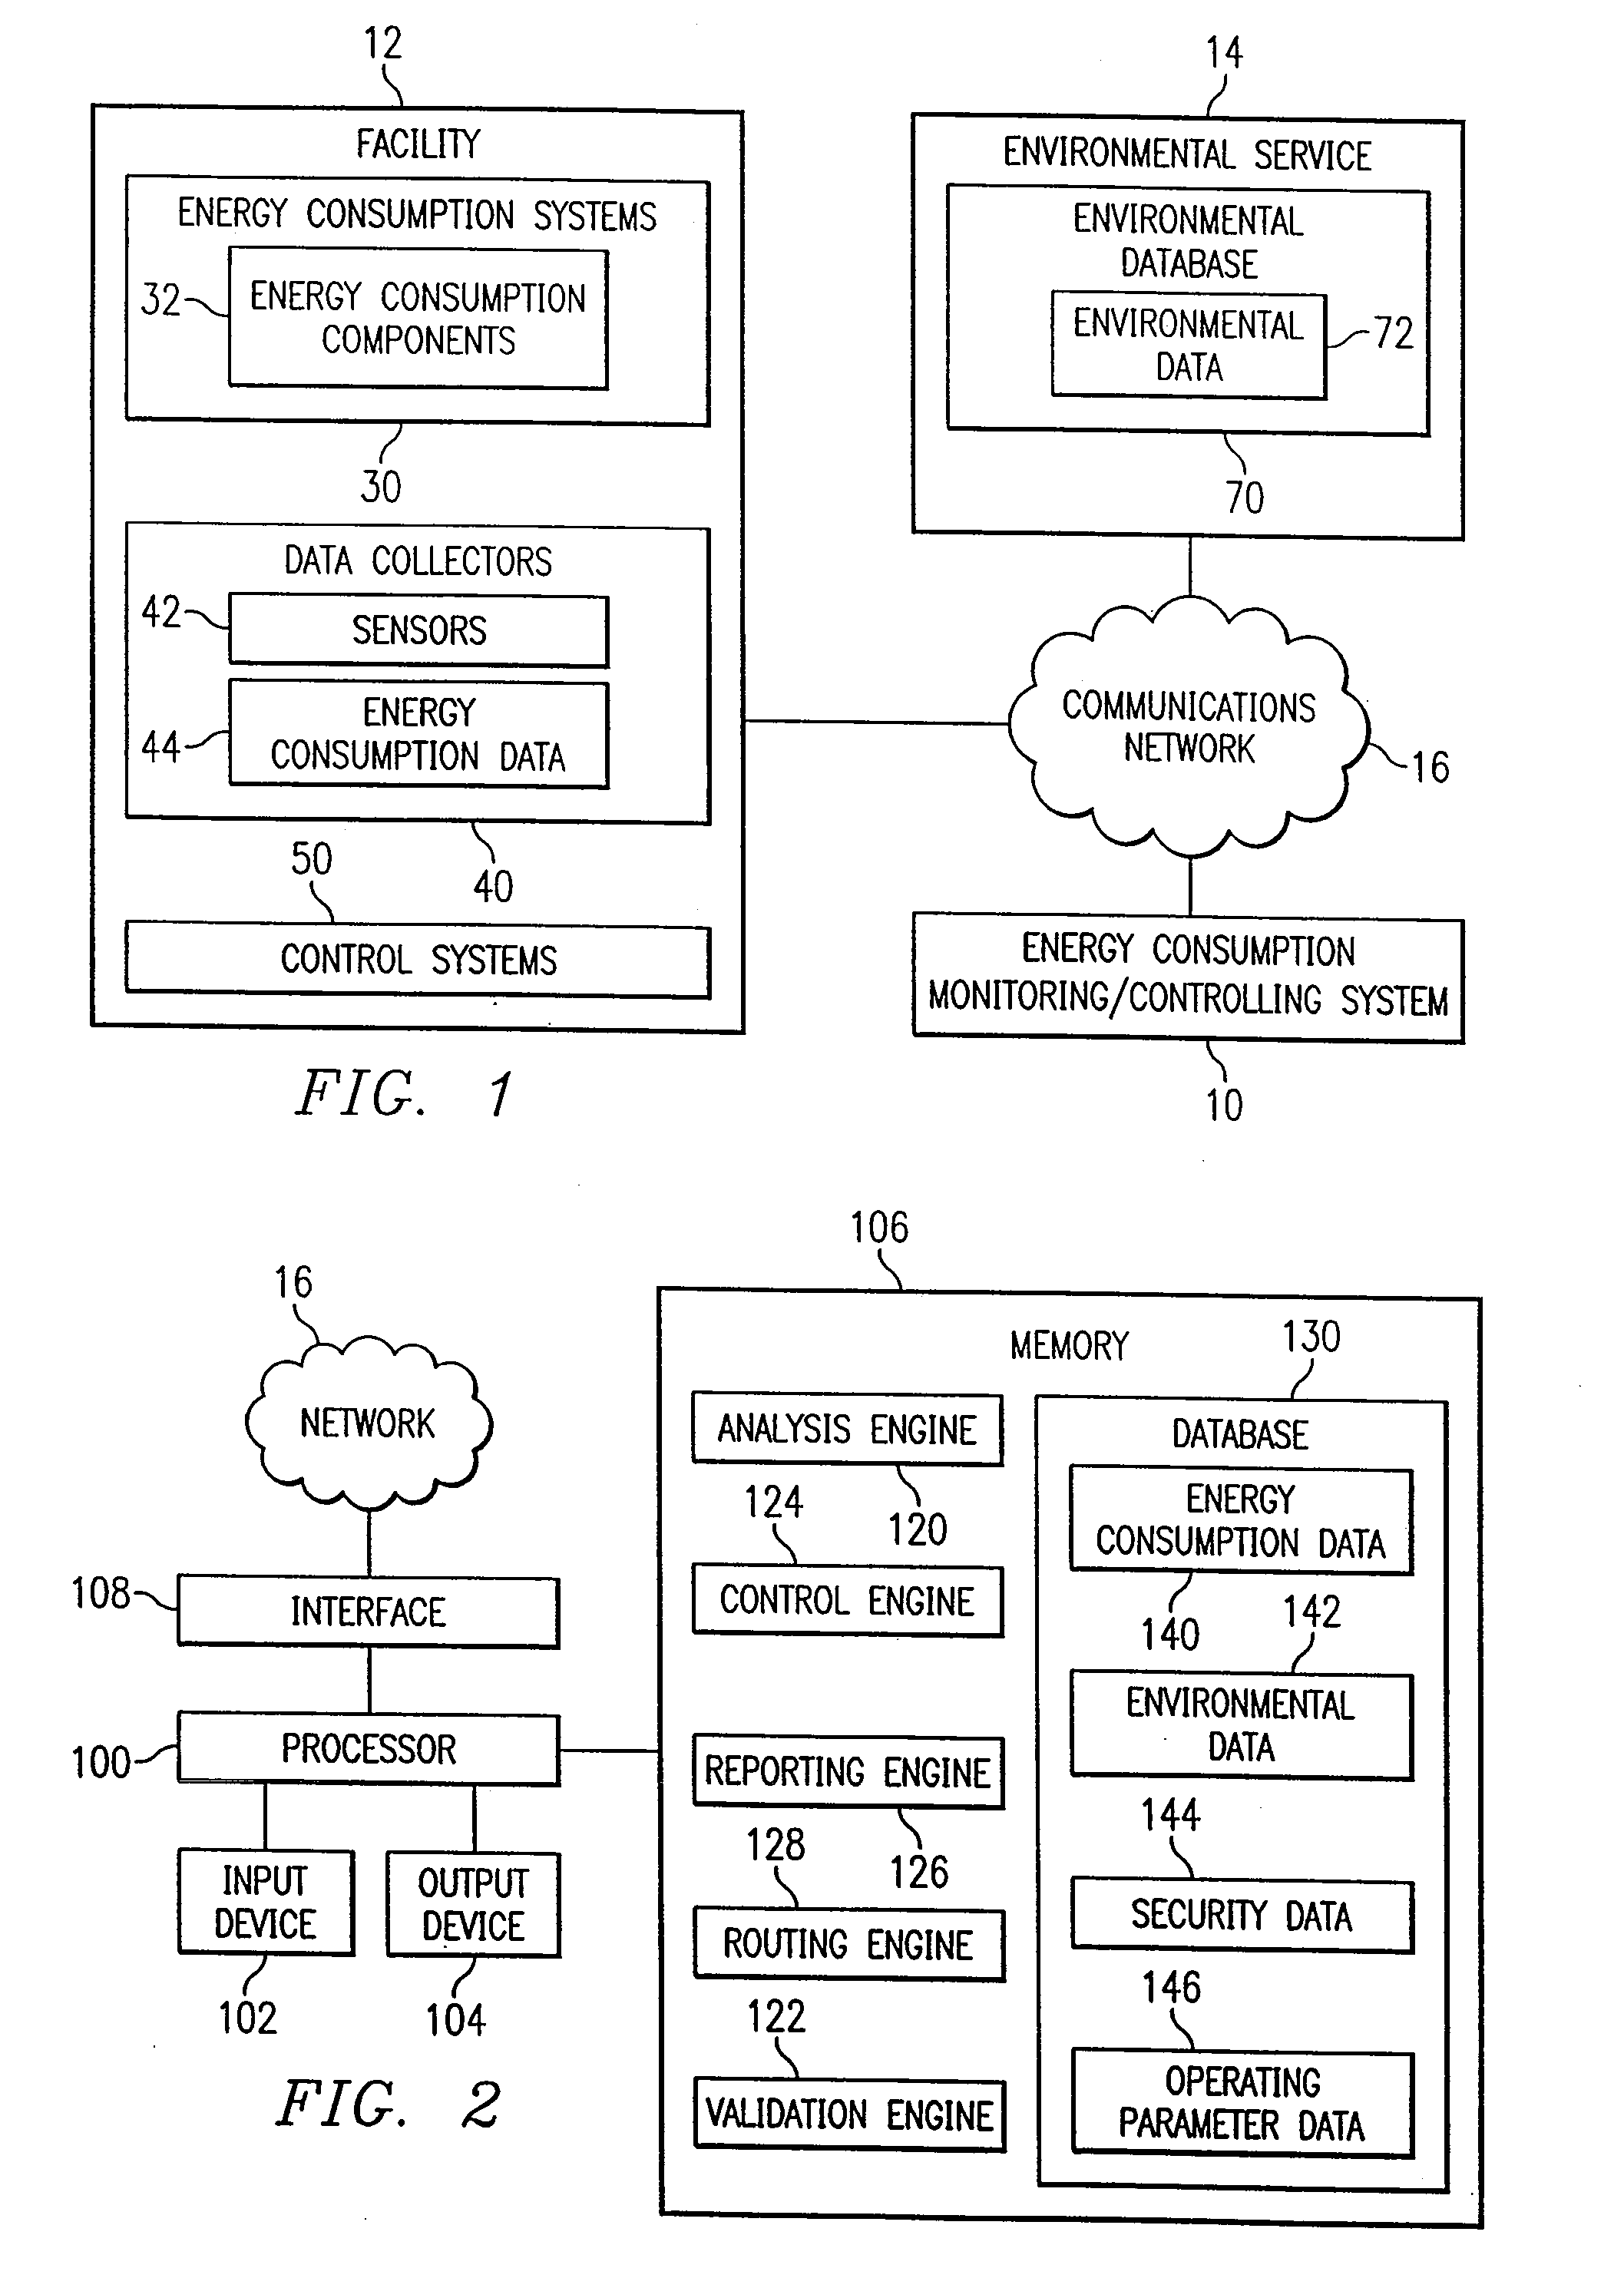 System and Method for Remote Monitoring and Controlling of Facility Energy Consumption